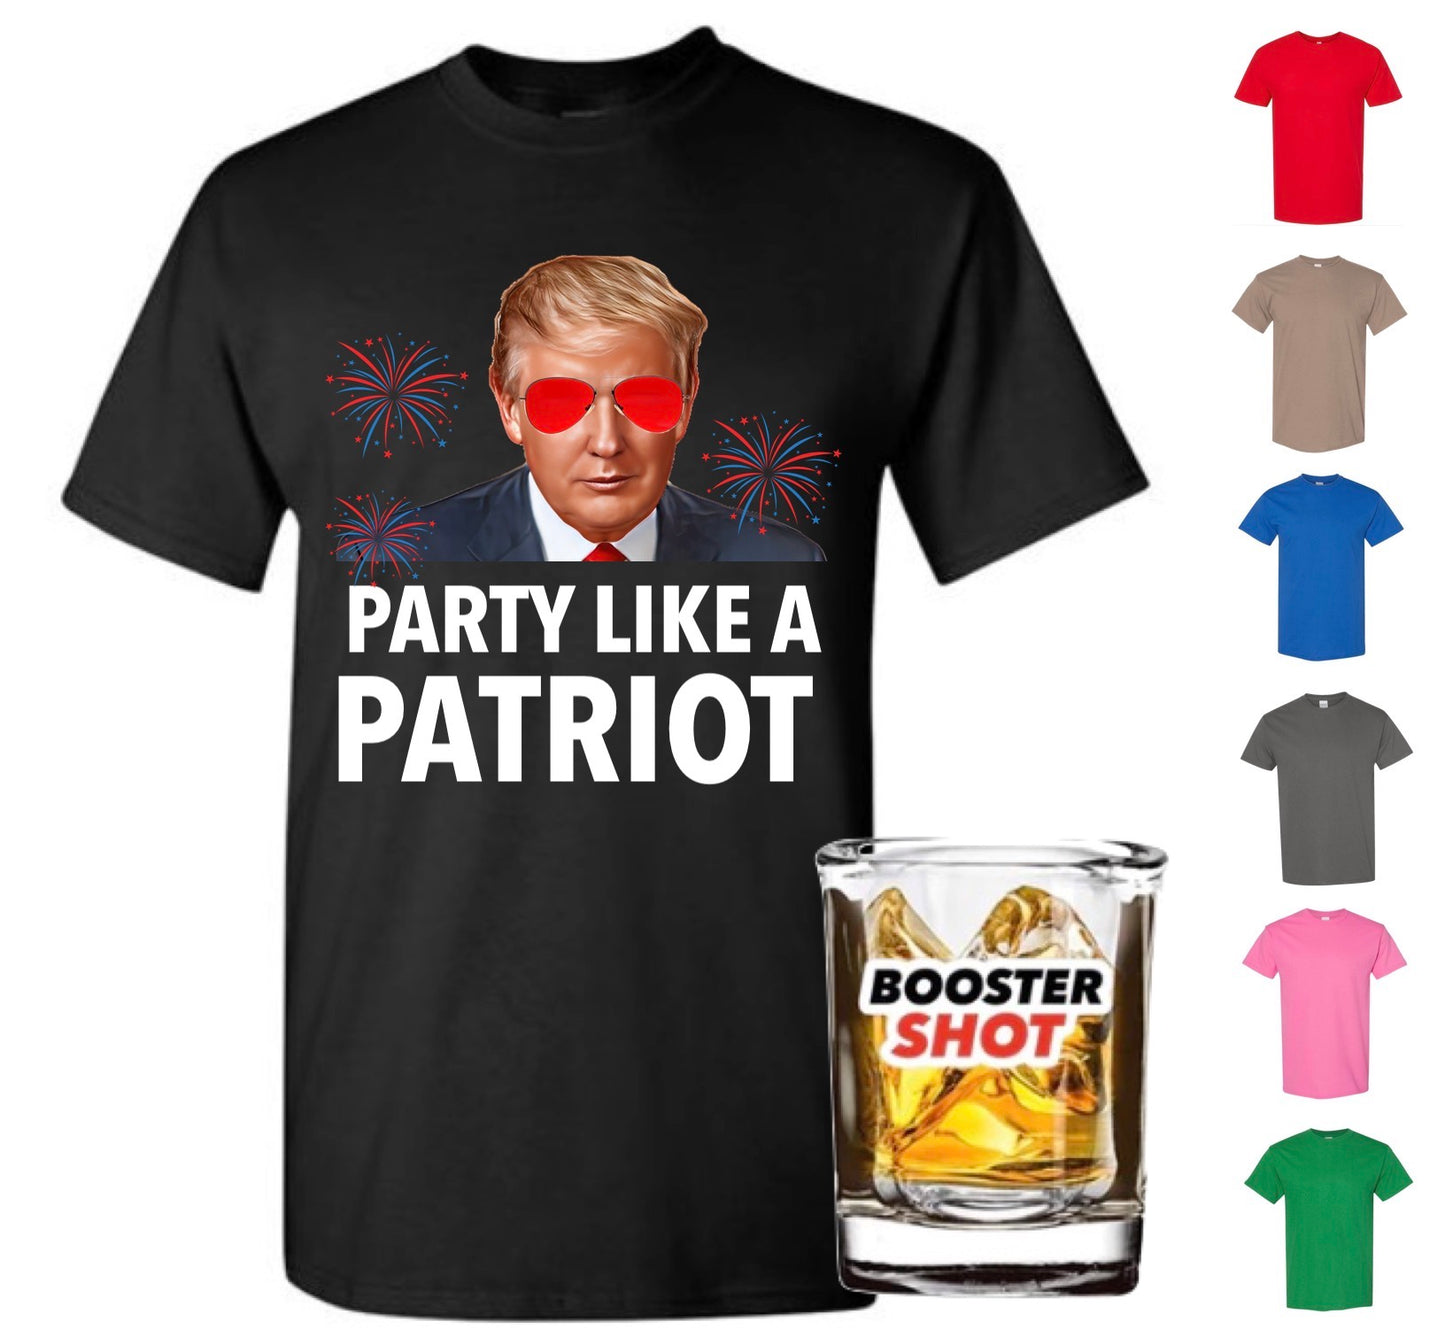 Party Like A Patriot Shirt (+FREE Booster Shot Glass)